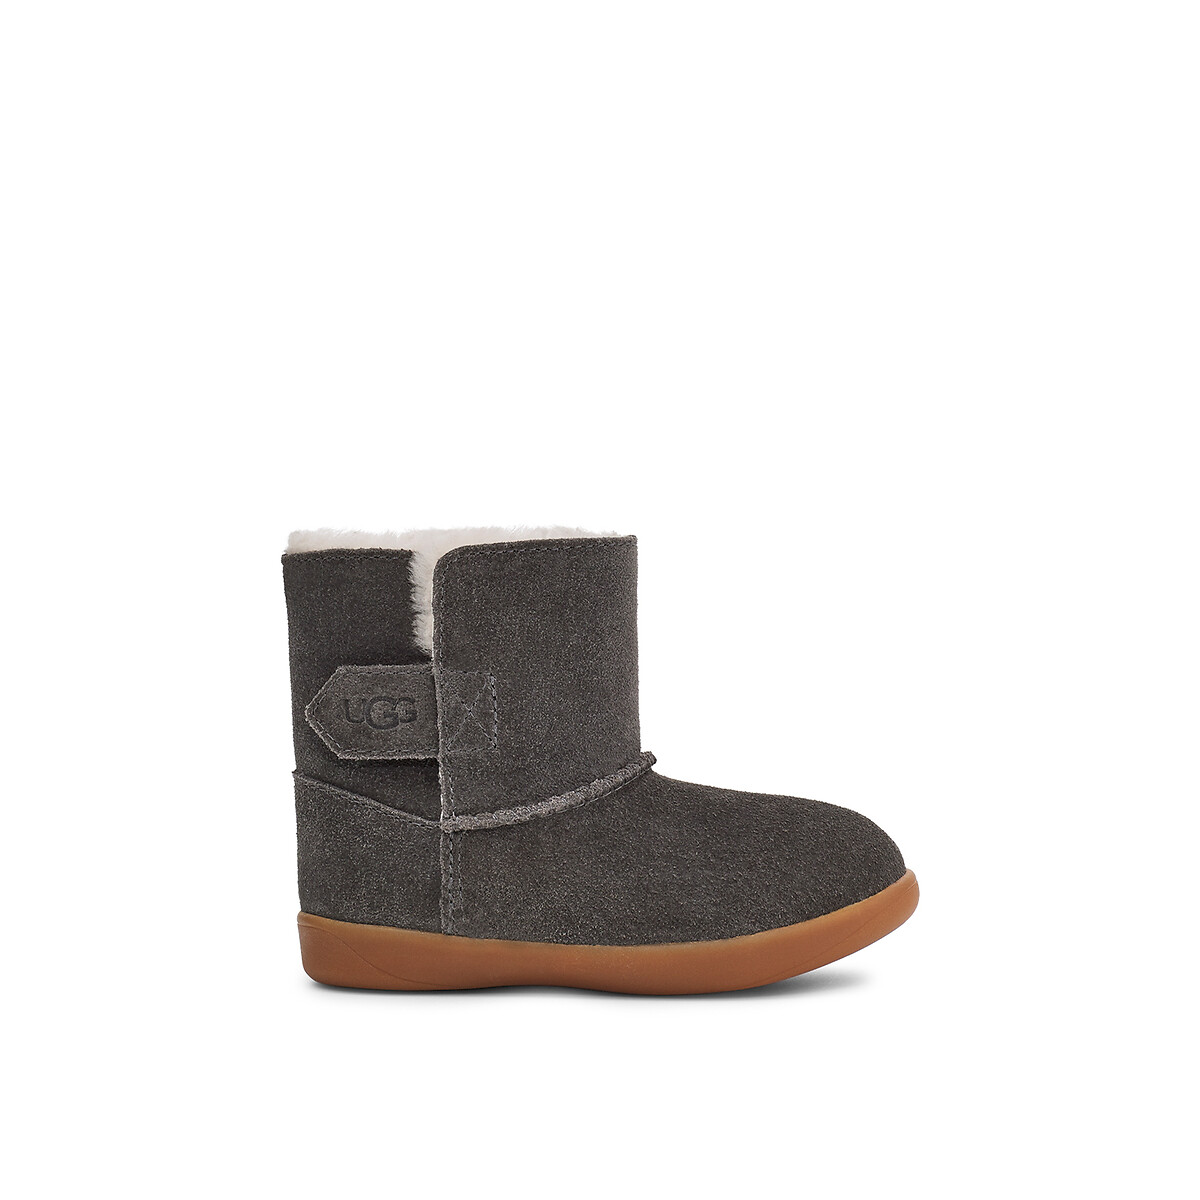 Image of Kids T Keelan Ankle Boots in Leather